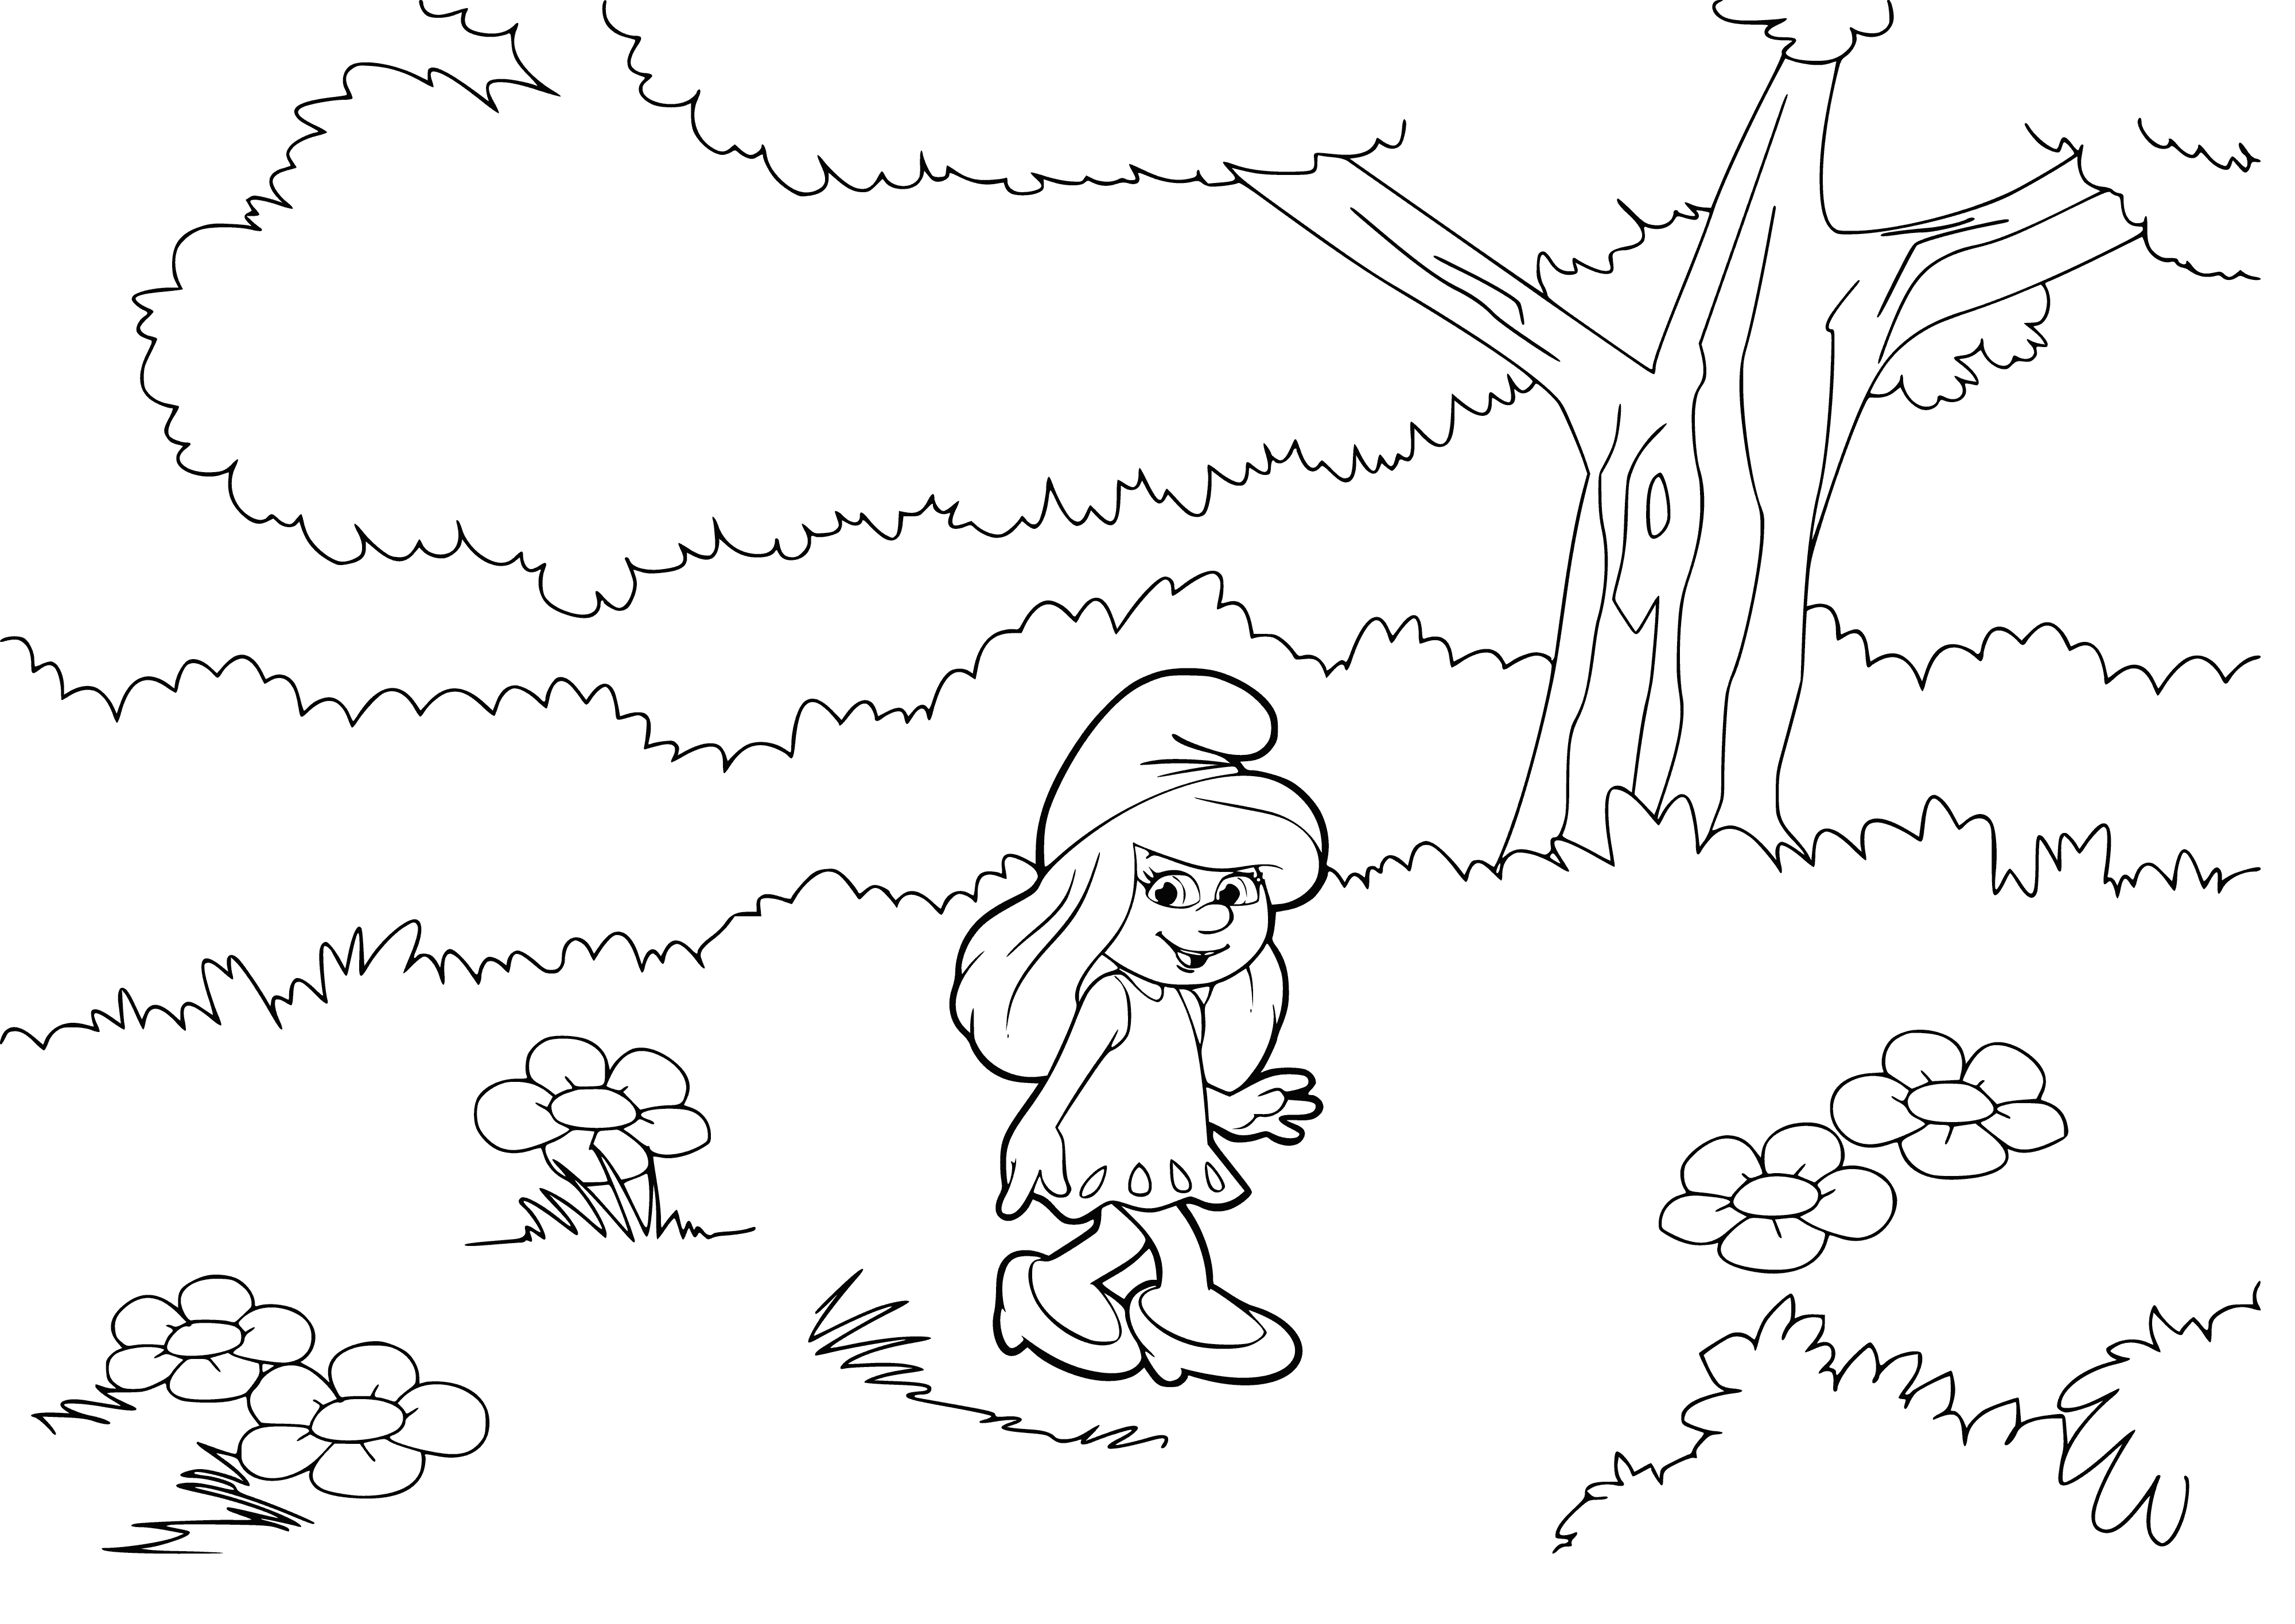 Smurfette coloring page